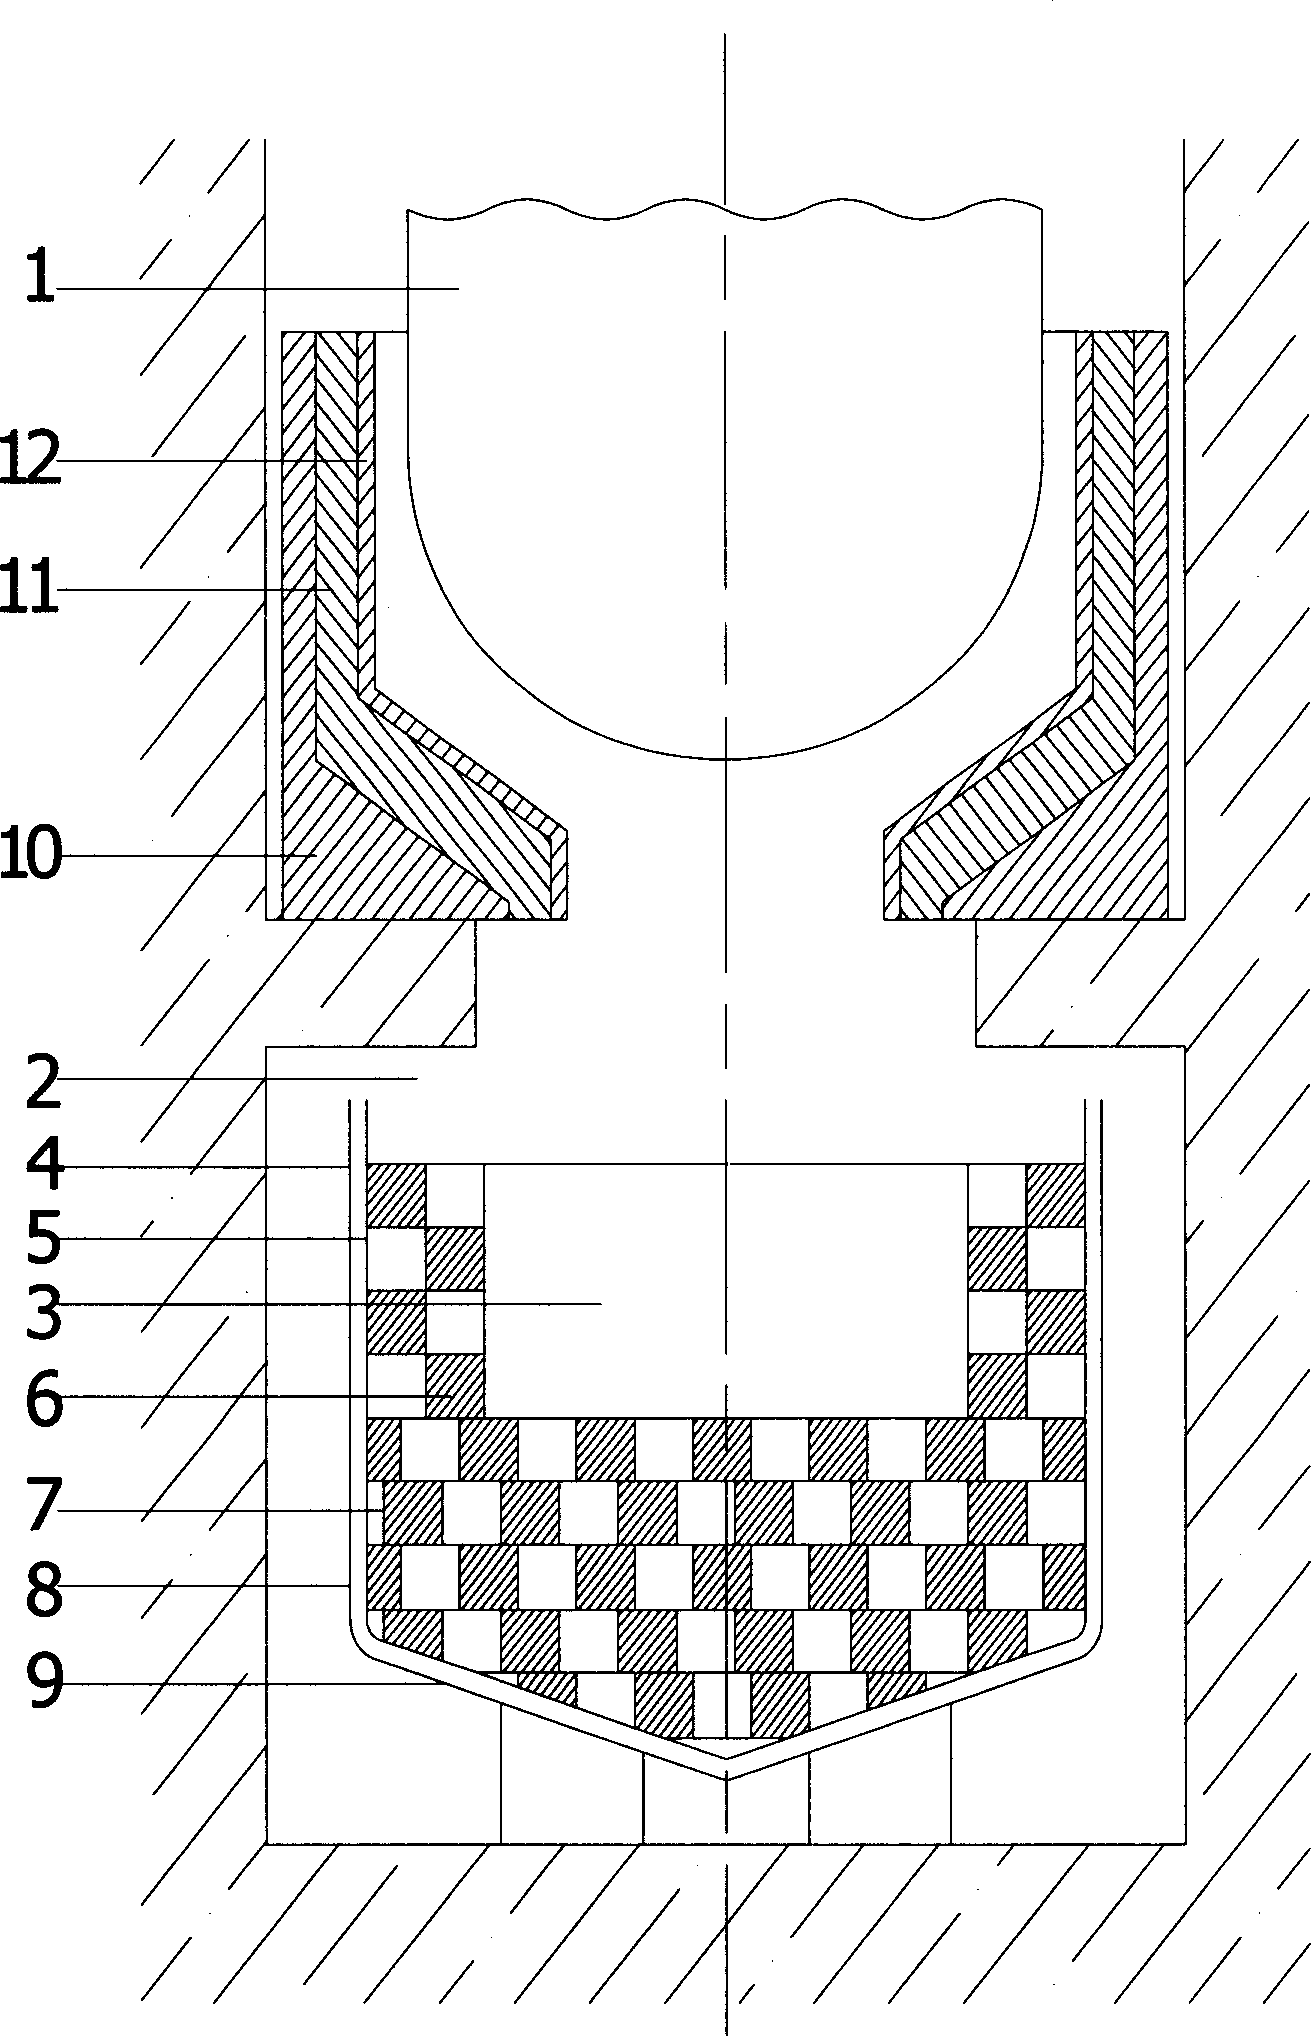 Apparatus for positioning and cooling lining layer of damaged LWR nuclear reactor